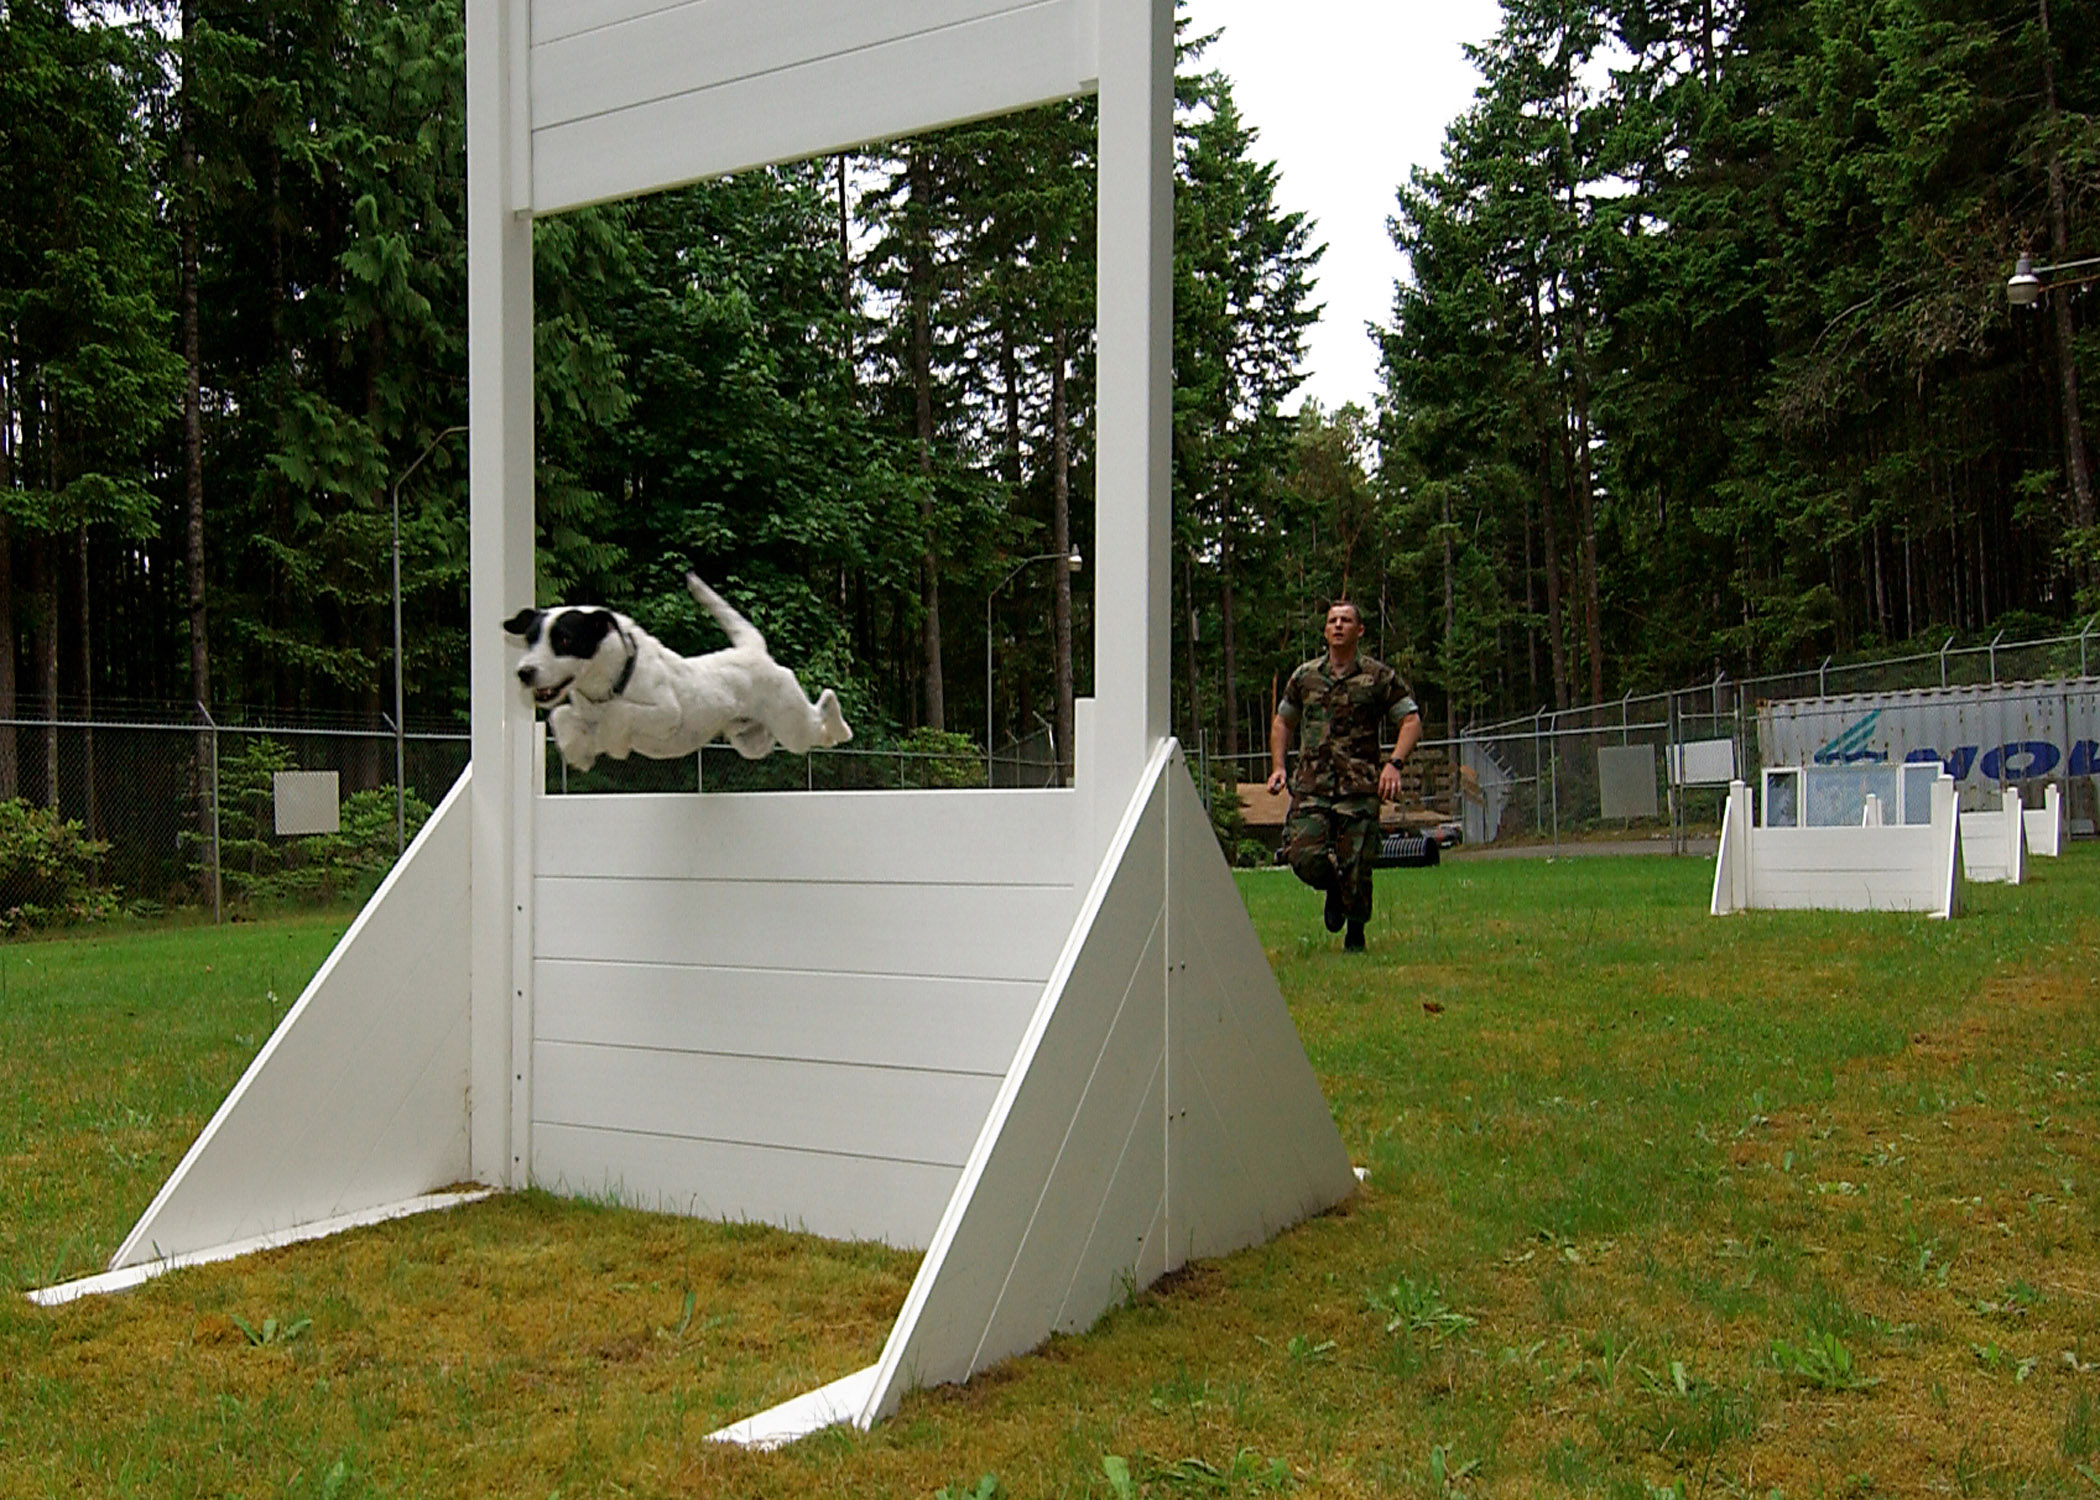 US Navy 060606-N-6177R-001 Zorro, a military working dog for Naval Base Kitsap, jumps through the obstacle course